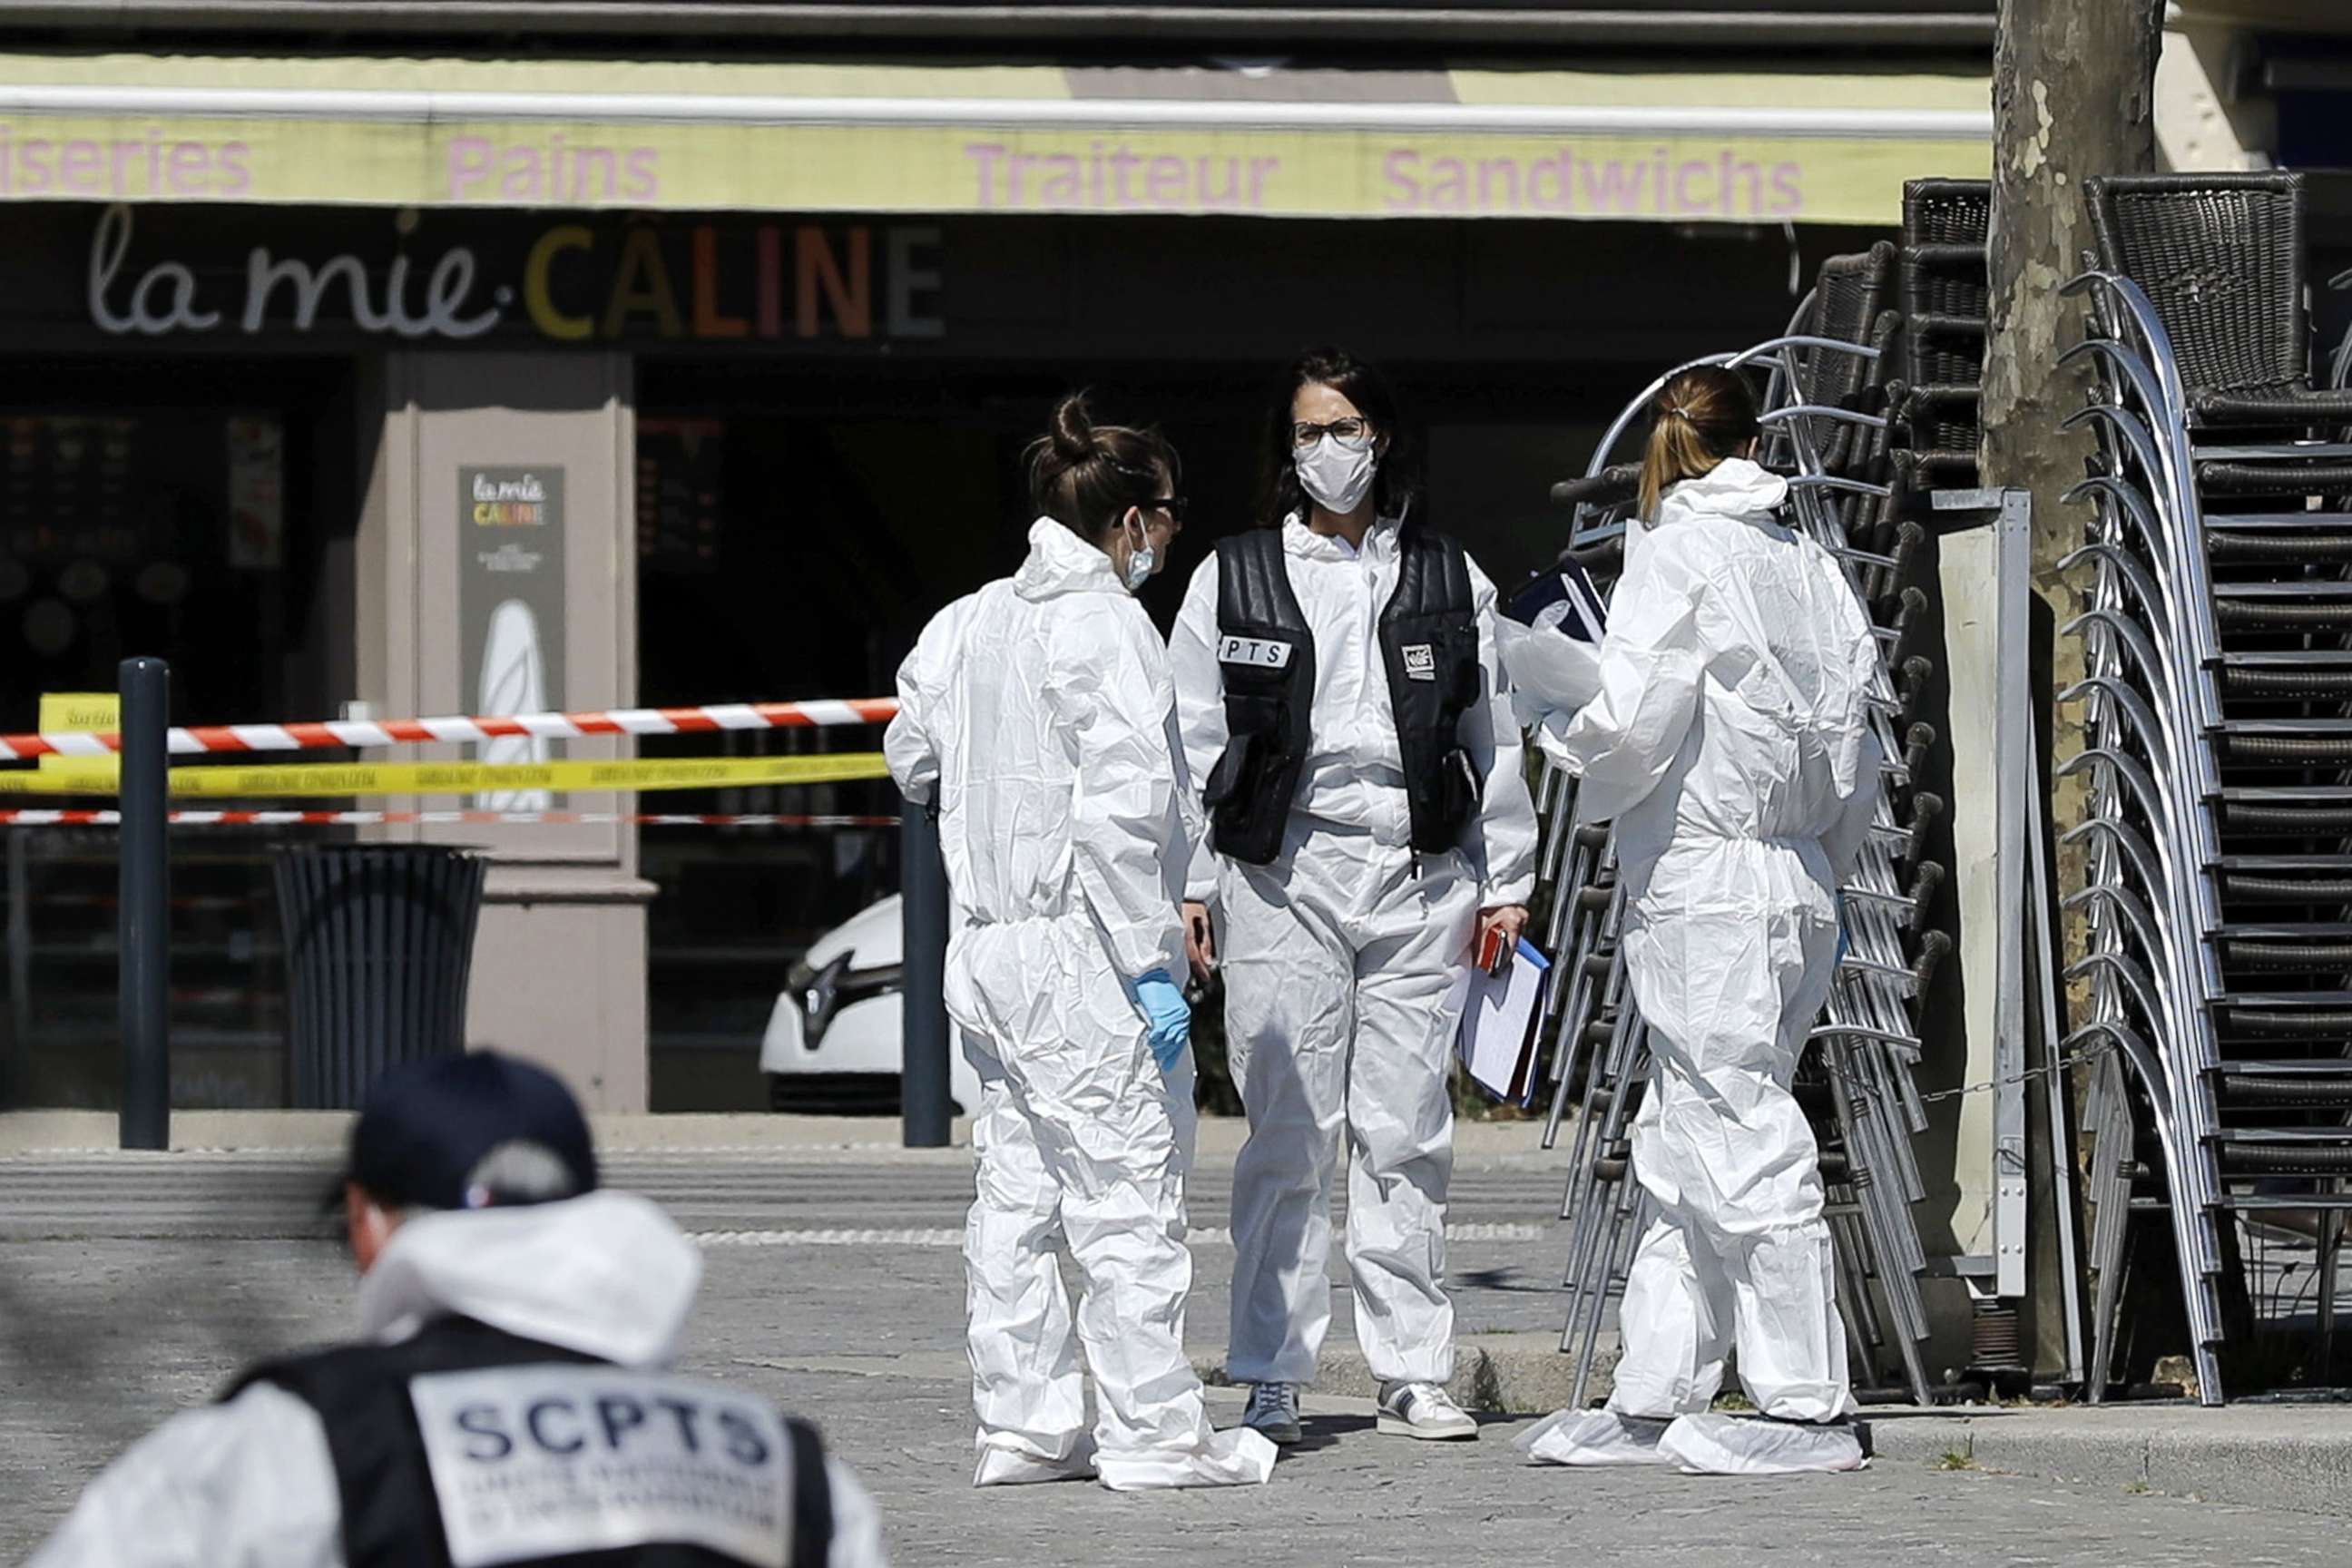 PHOTO: Police officers and investigators work on the scene of attack after a man stabbed several people in Romans-sur-Isere, France, April 4, 2020.